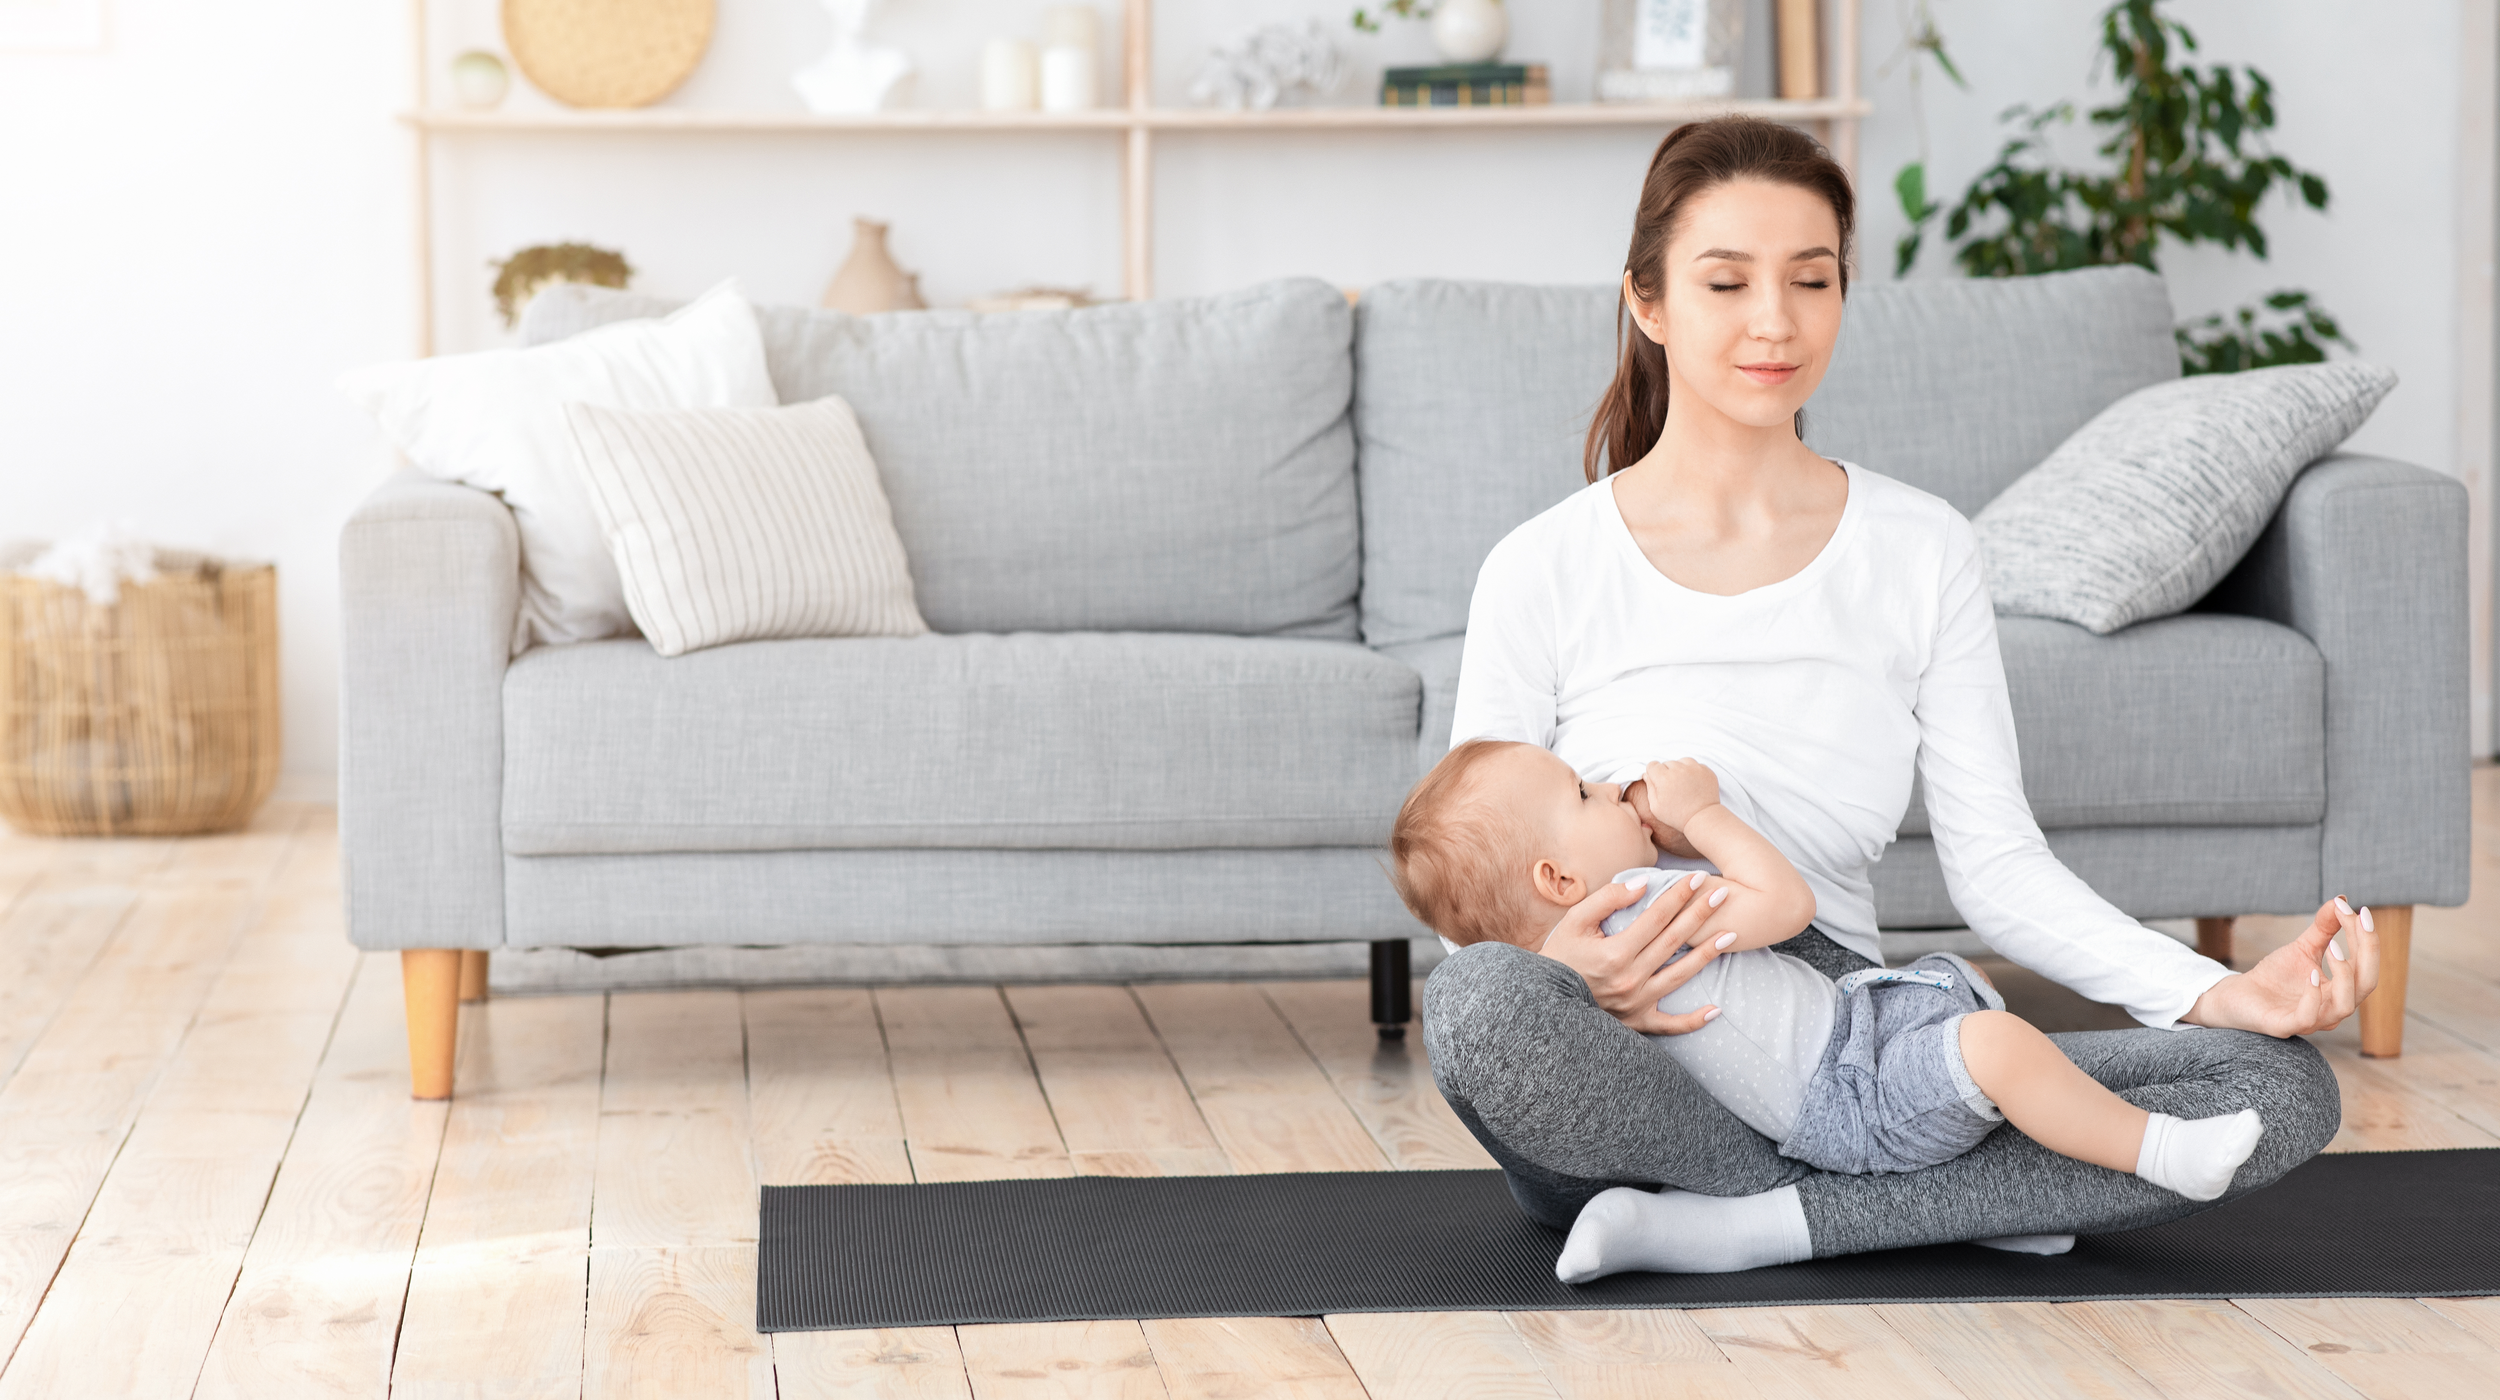 What Kind of Exercise Should I do After I Have a Baby?